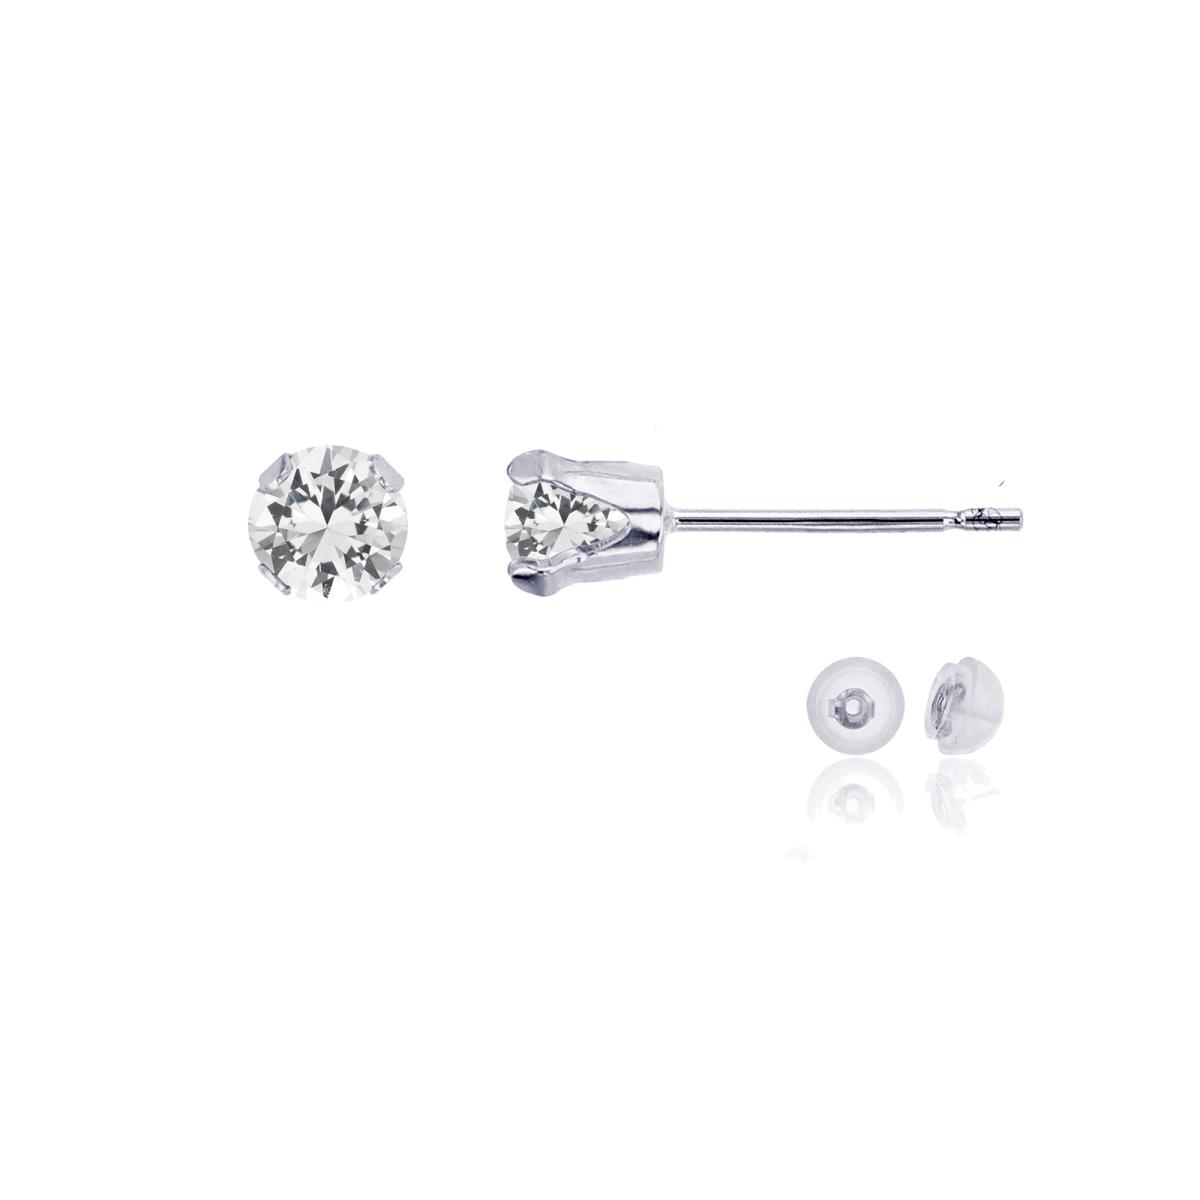 10K White Gold 4mm Round Cr White Sapphire Stud Earring with Silicone Back